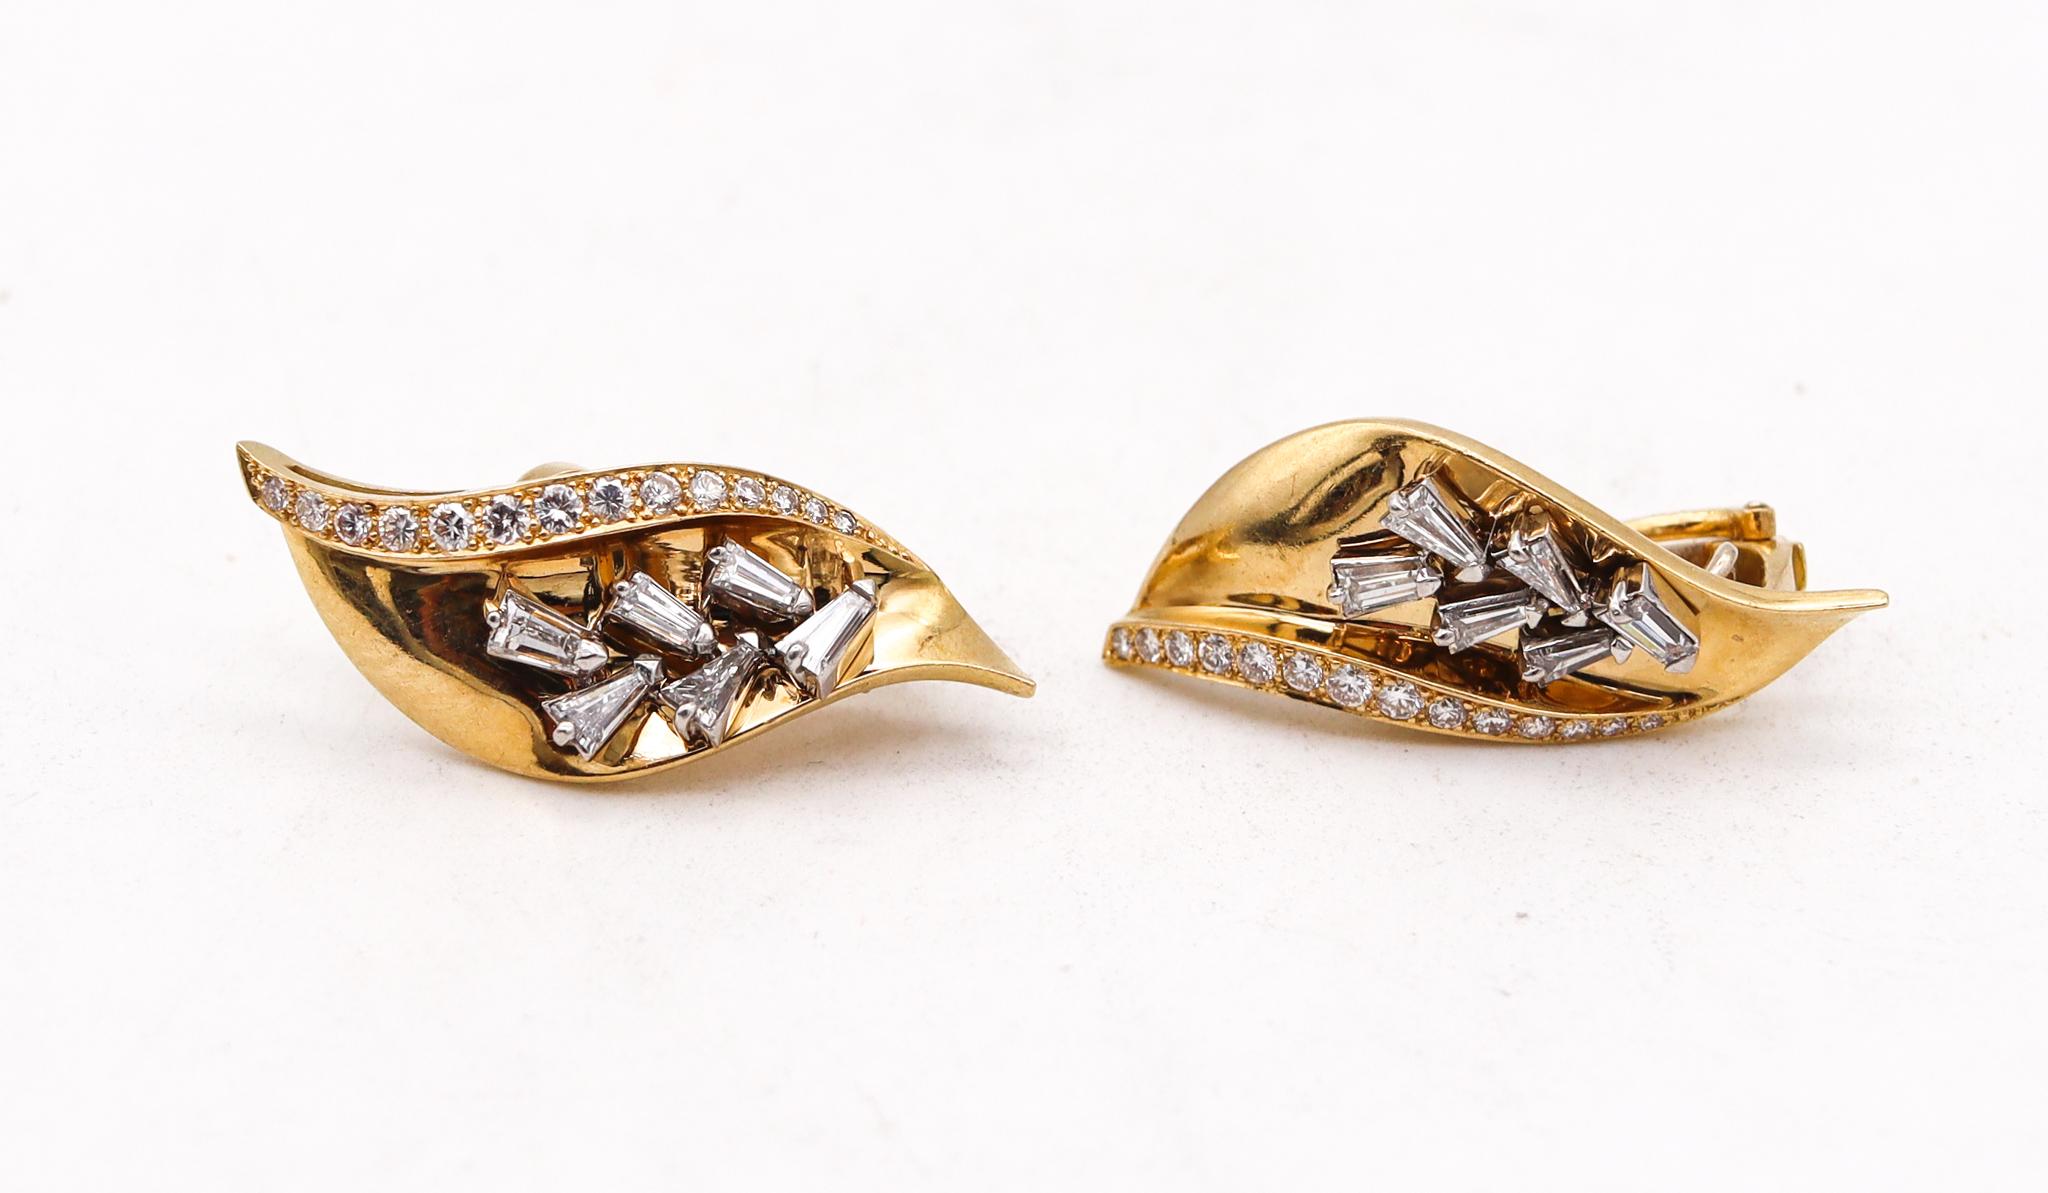 Pair of clip-on earrings  designed by Guillemin & Soulaine.

A very rare highly collectible pieces of jewelry, created in Paris France at the exclusive jewelry atelier of Guillemin & Soulaine, back in the 1970. The beautiful convertible pair of clip